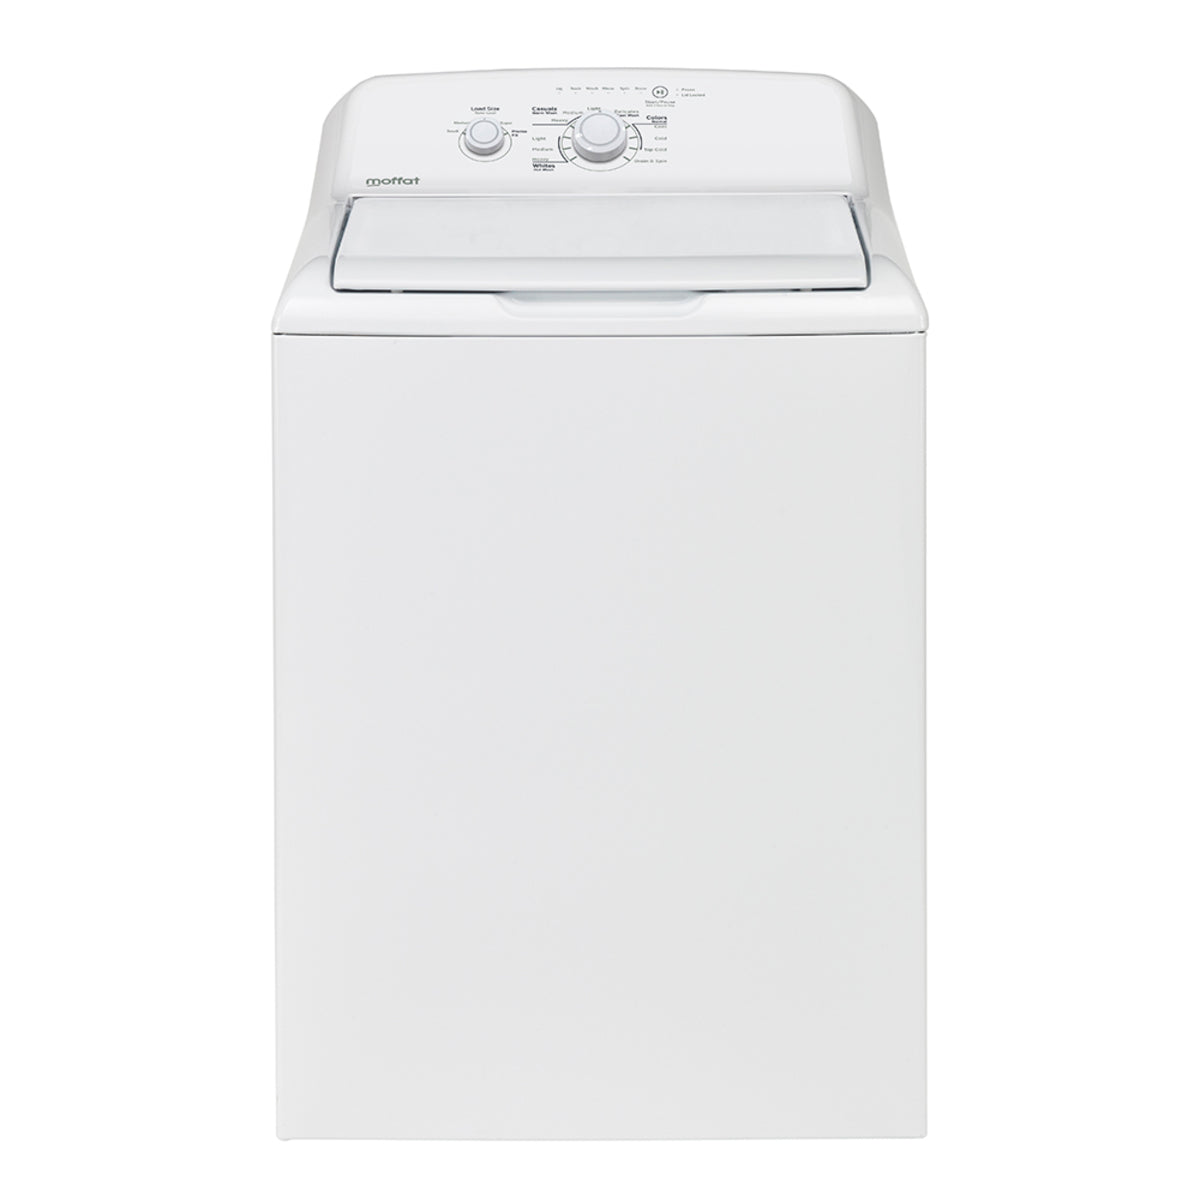 GE - 4.4 cu. Ft  Top Load Washer in White - MTW201BMRWW